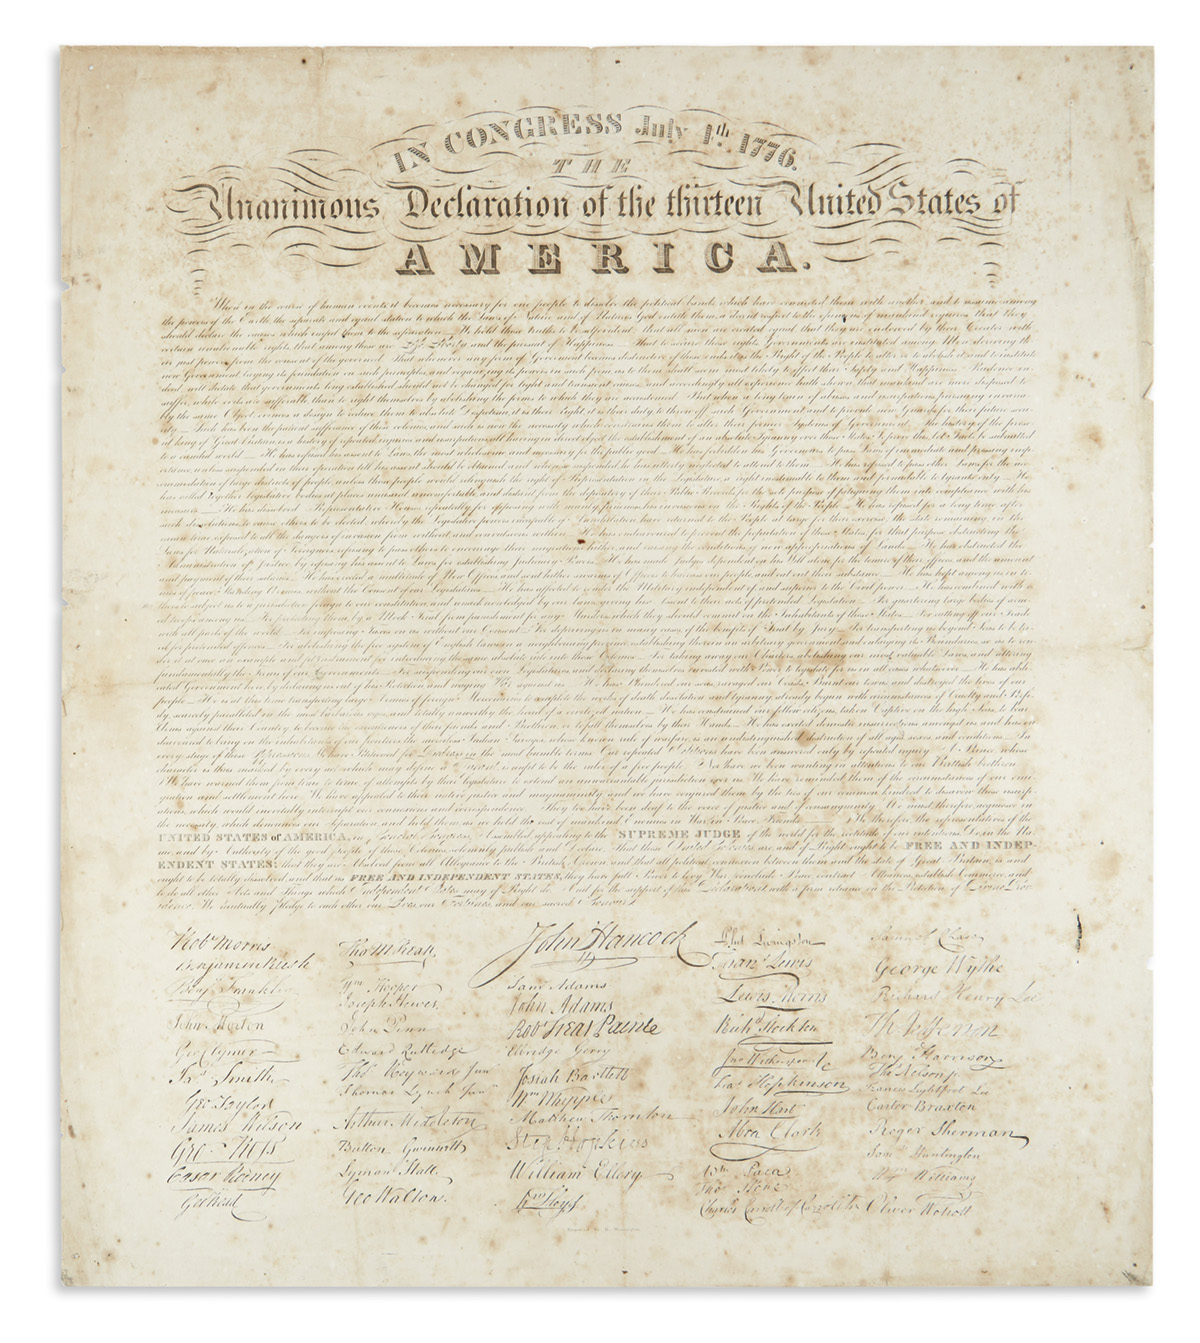 (DECLARATION OF INDEPENDENCE.) In Congress July 4th. 1776. The Unanimous Declaration of the Thirteen United States of America.